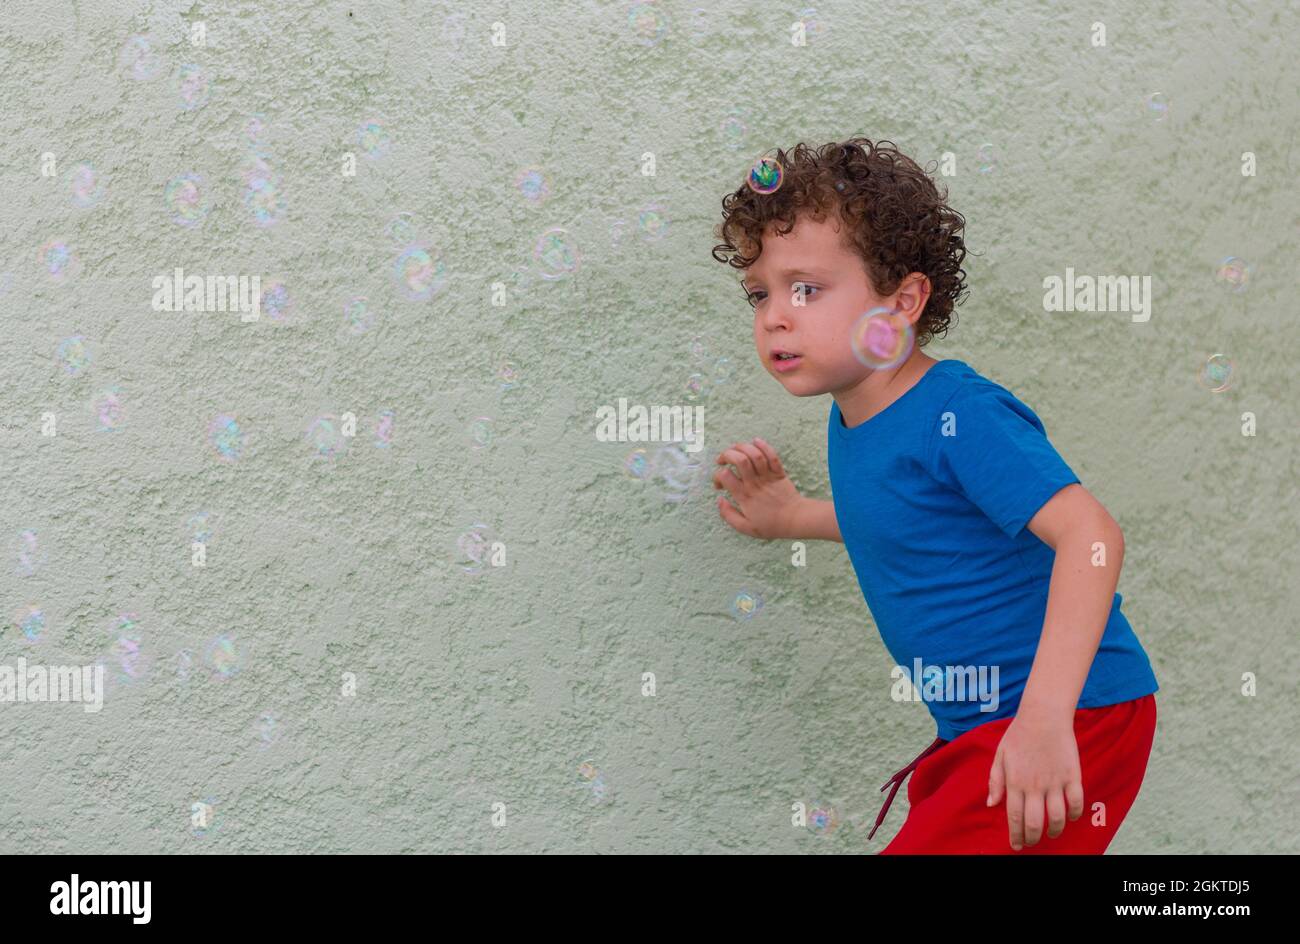 child playing in the playground with soap bubbles Stock Photo